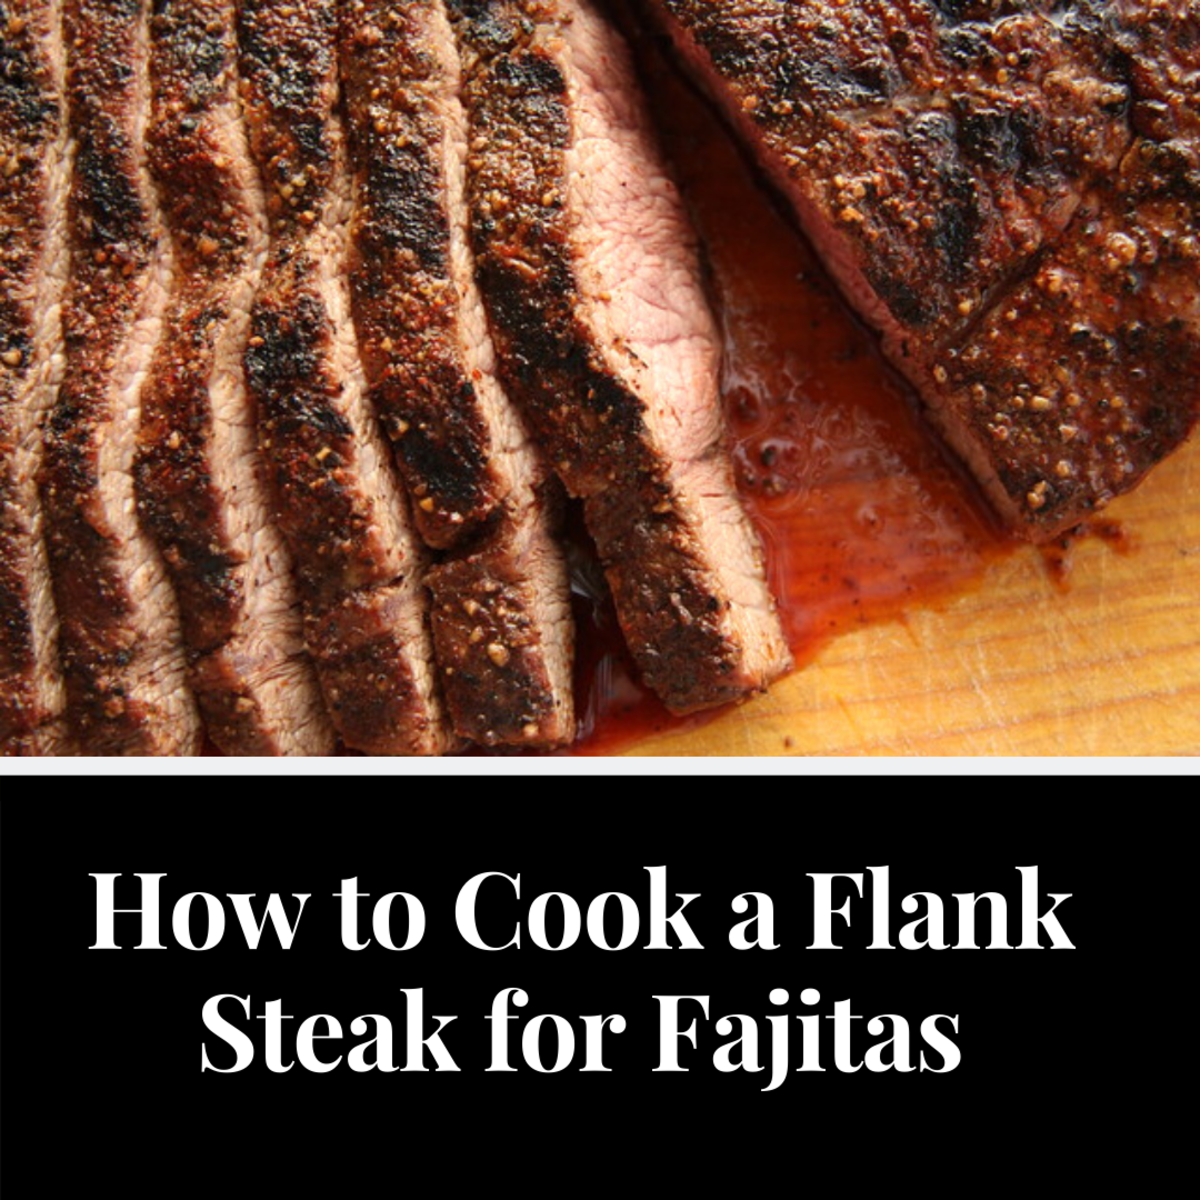 How to Cook a Flank Steak for Fajitas—5 Steps to Perfection